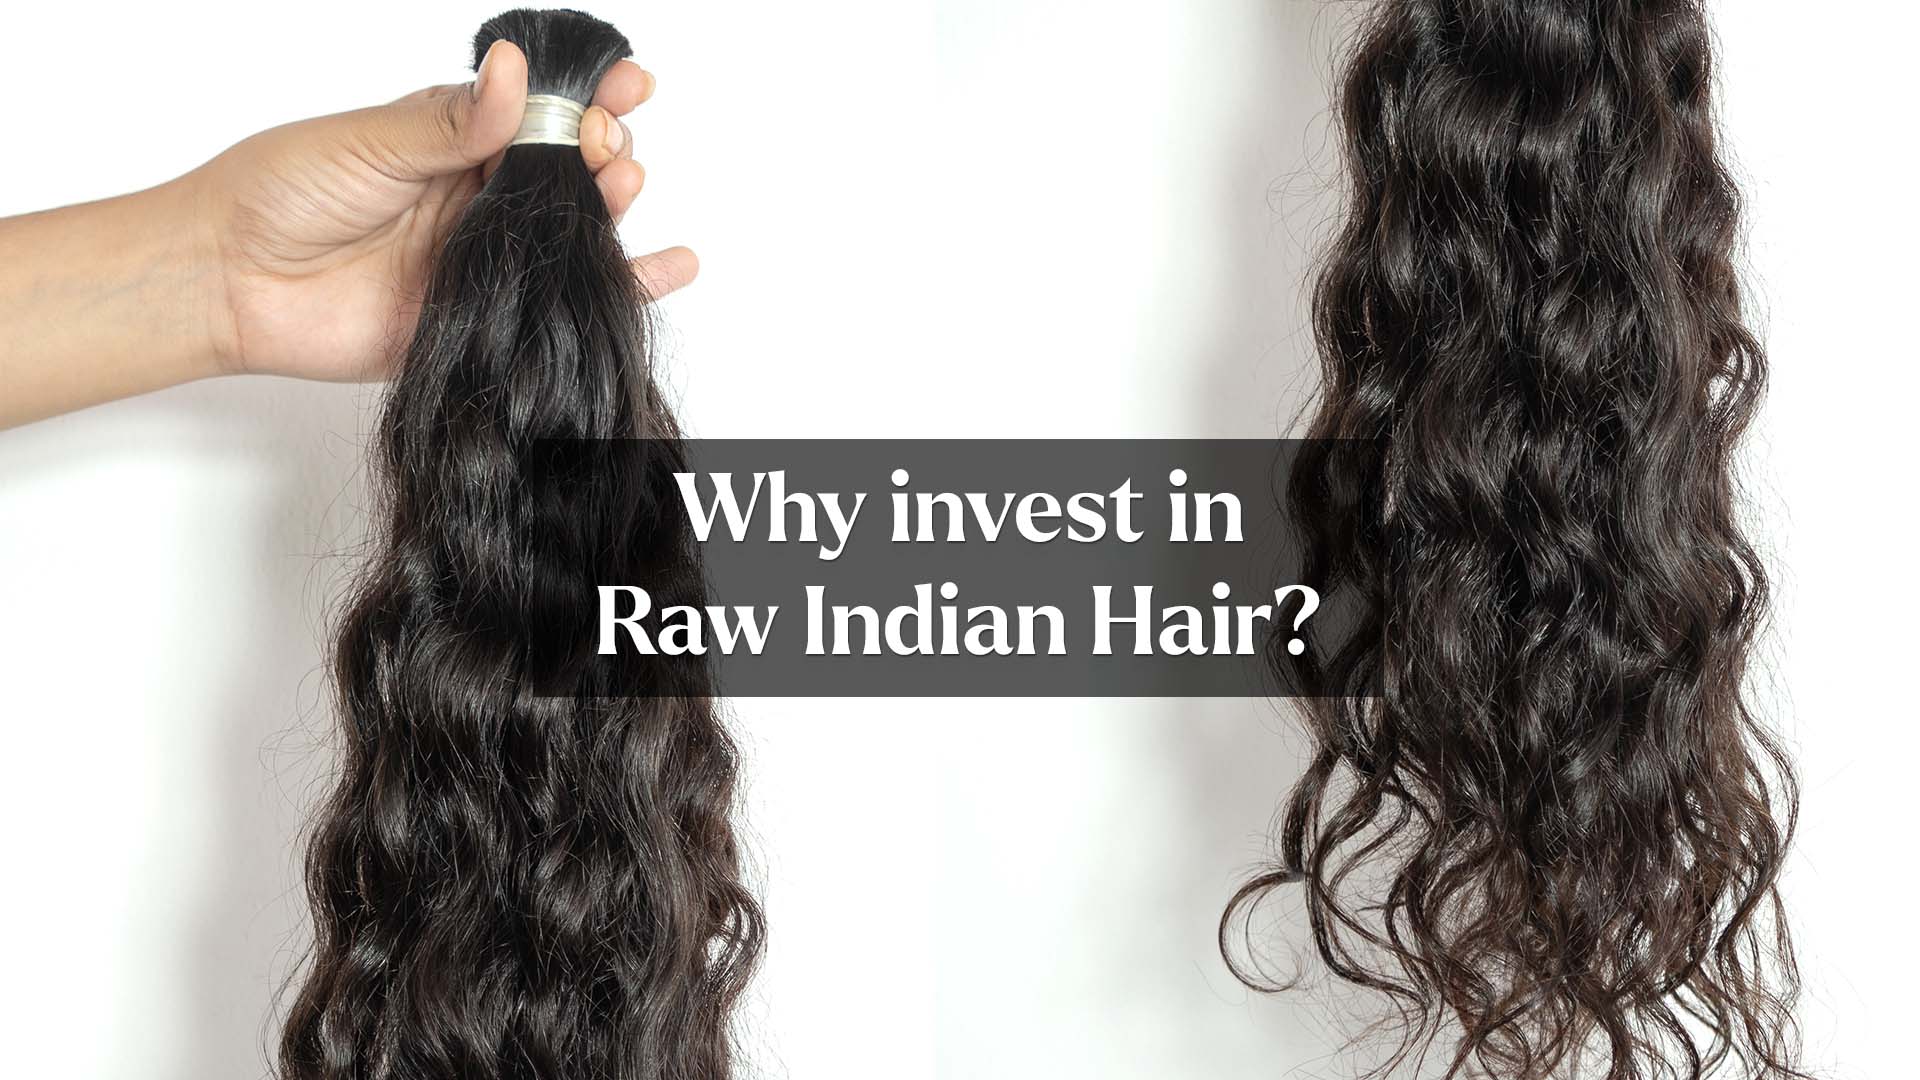 Why invest in raw Indian hair?